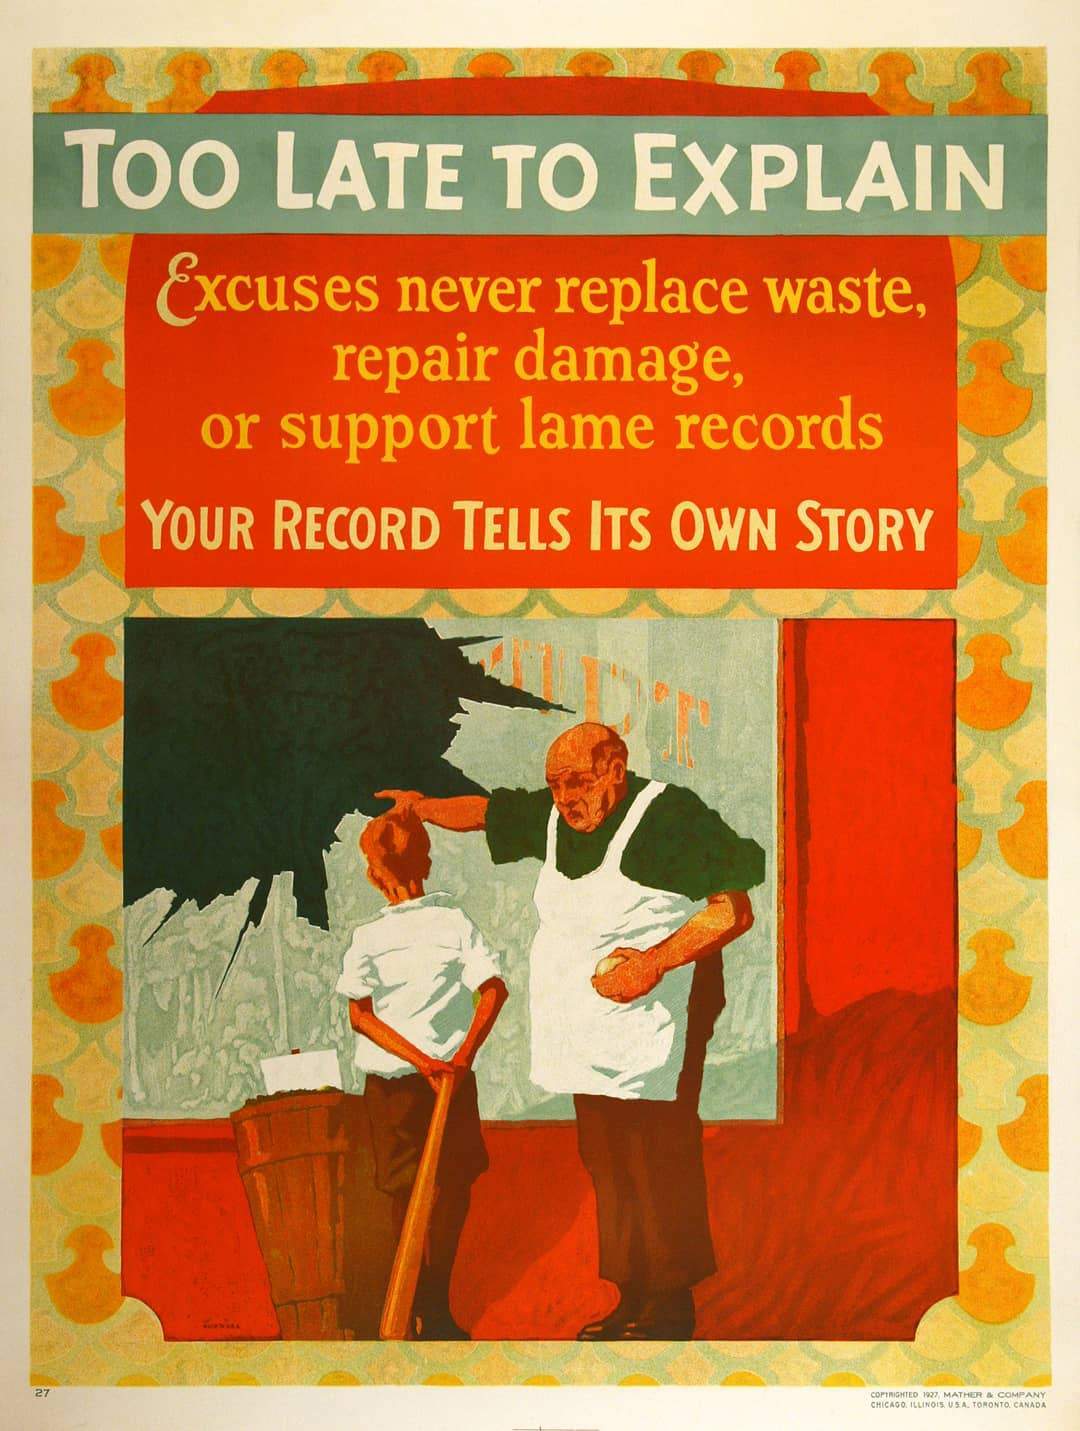 Original Mather Work Incentive Poster 1927 - Too Late to Explain